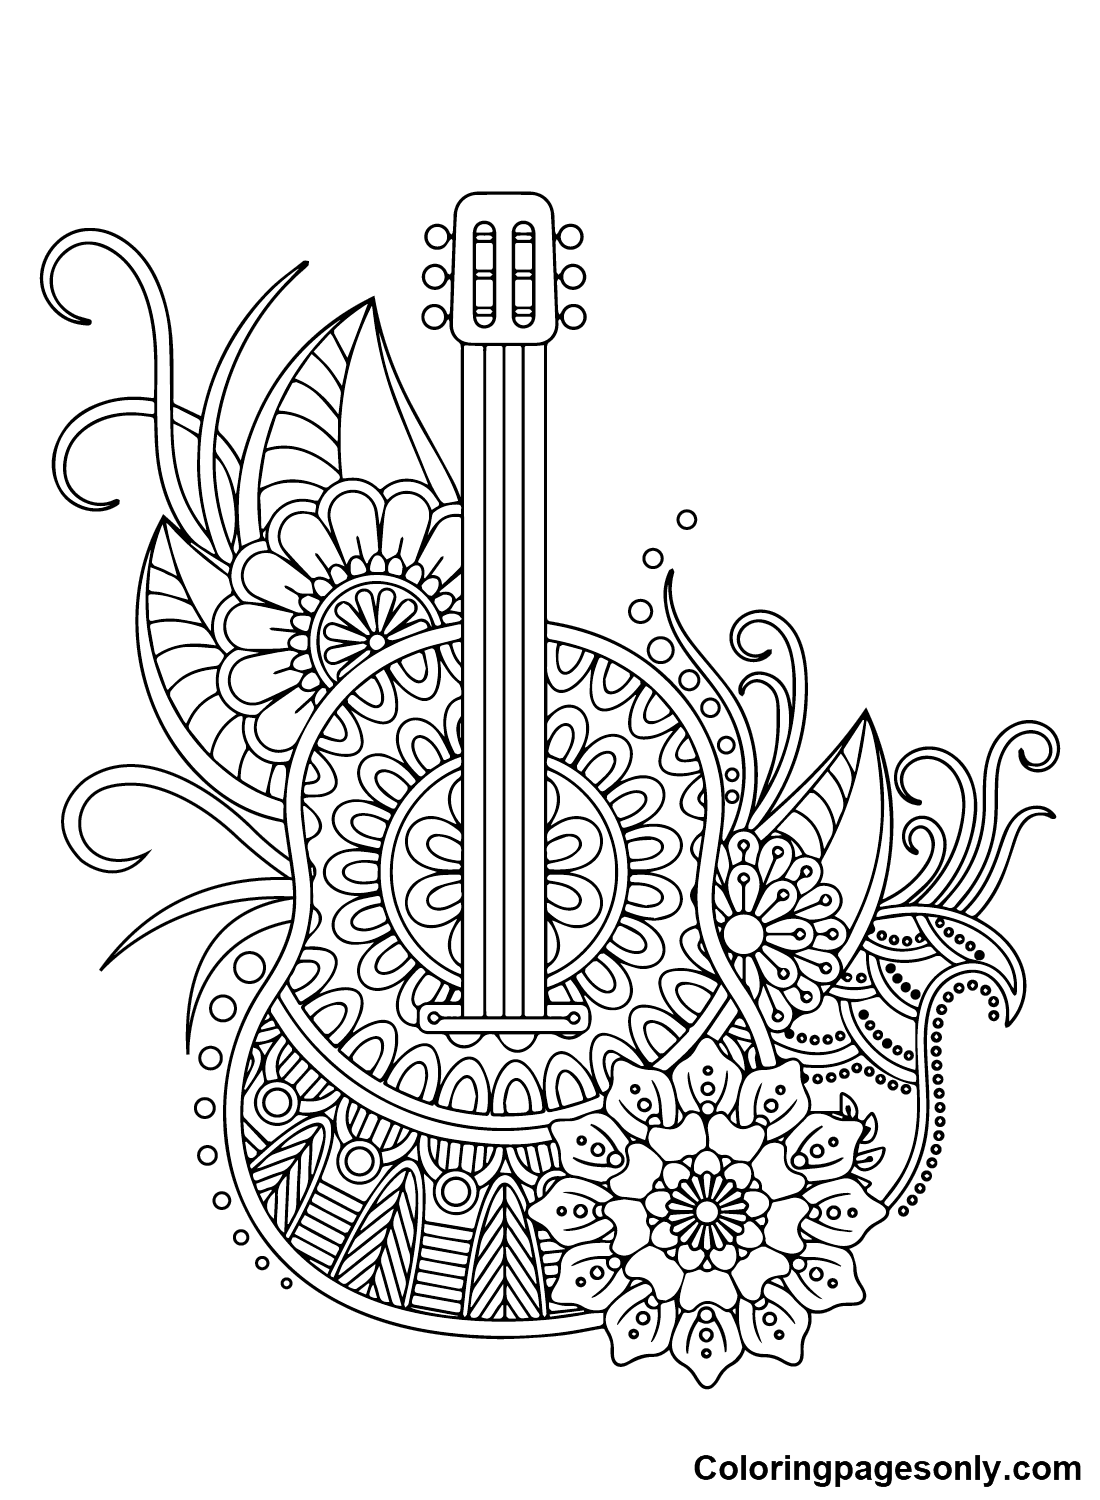 Guitar Sheets Coloring Pages